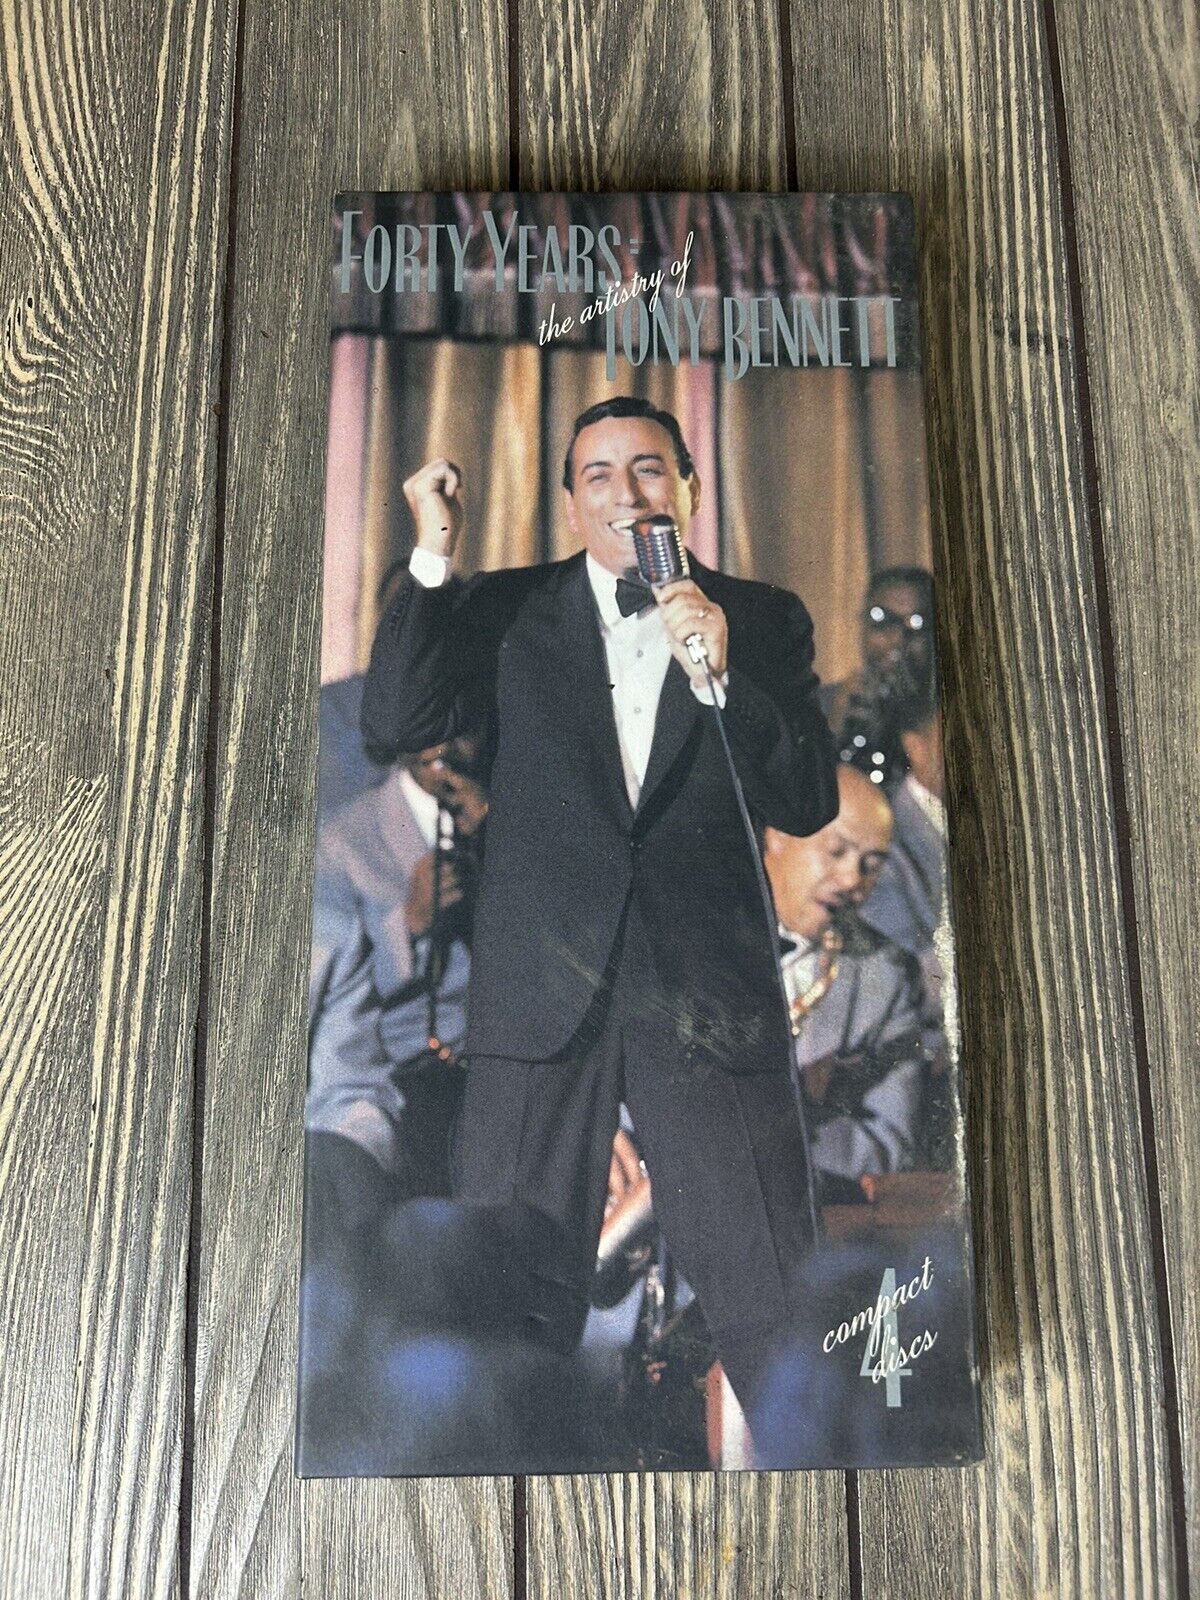 Vintage Forty Years The Artistry Of Tony Bennett Volume 3 And 4 Only